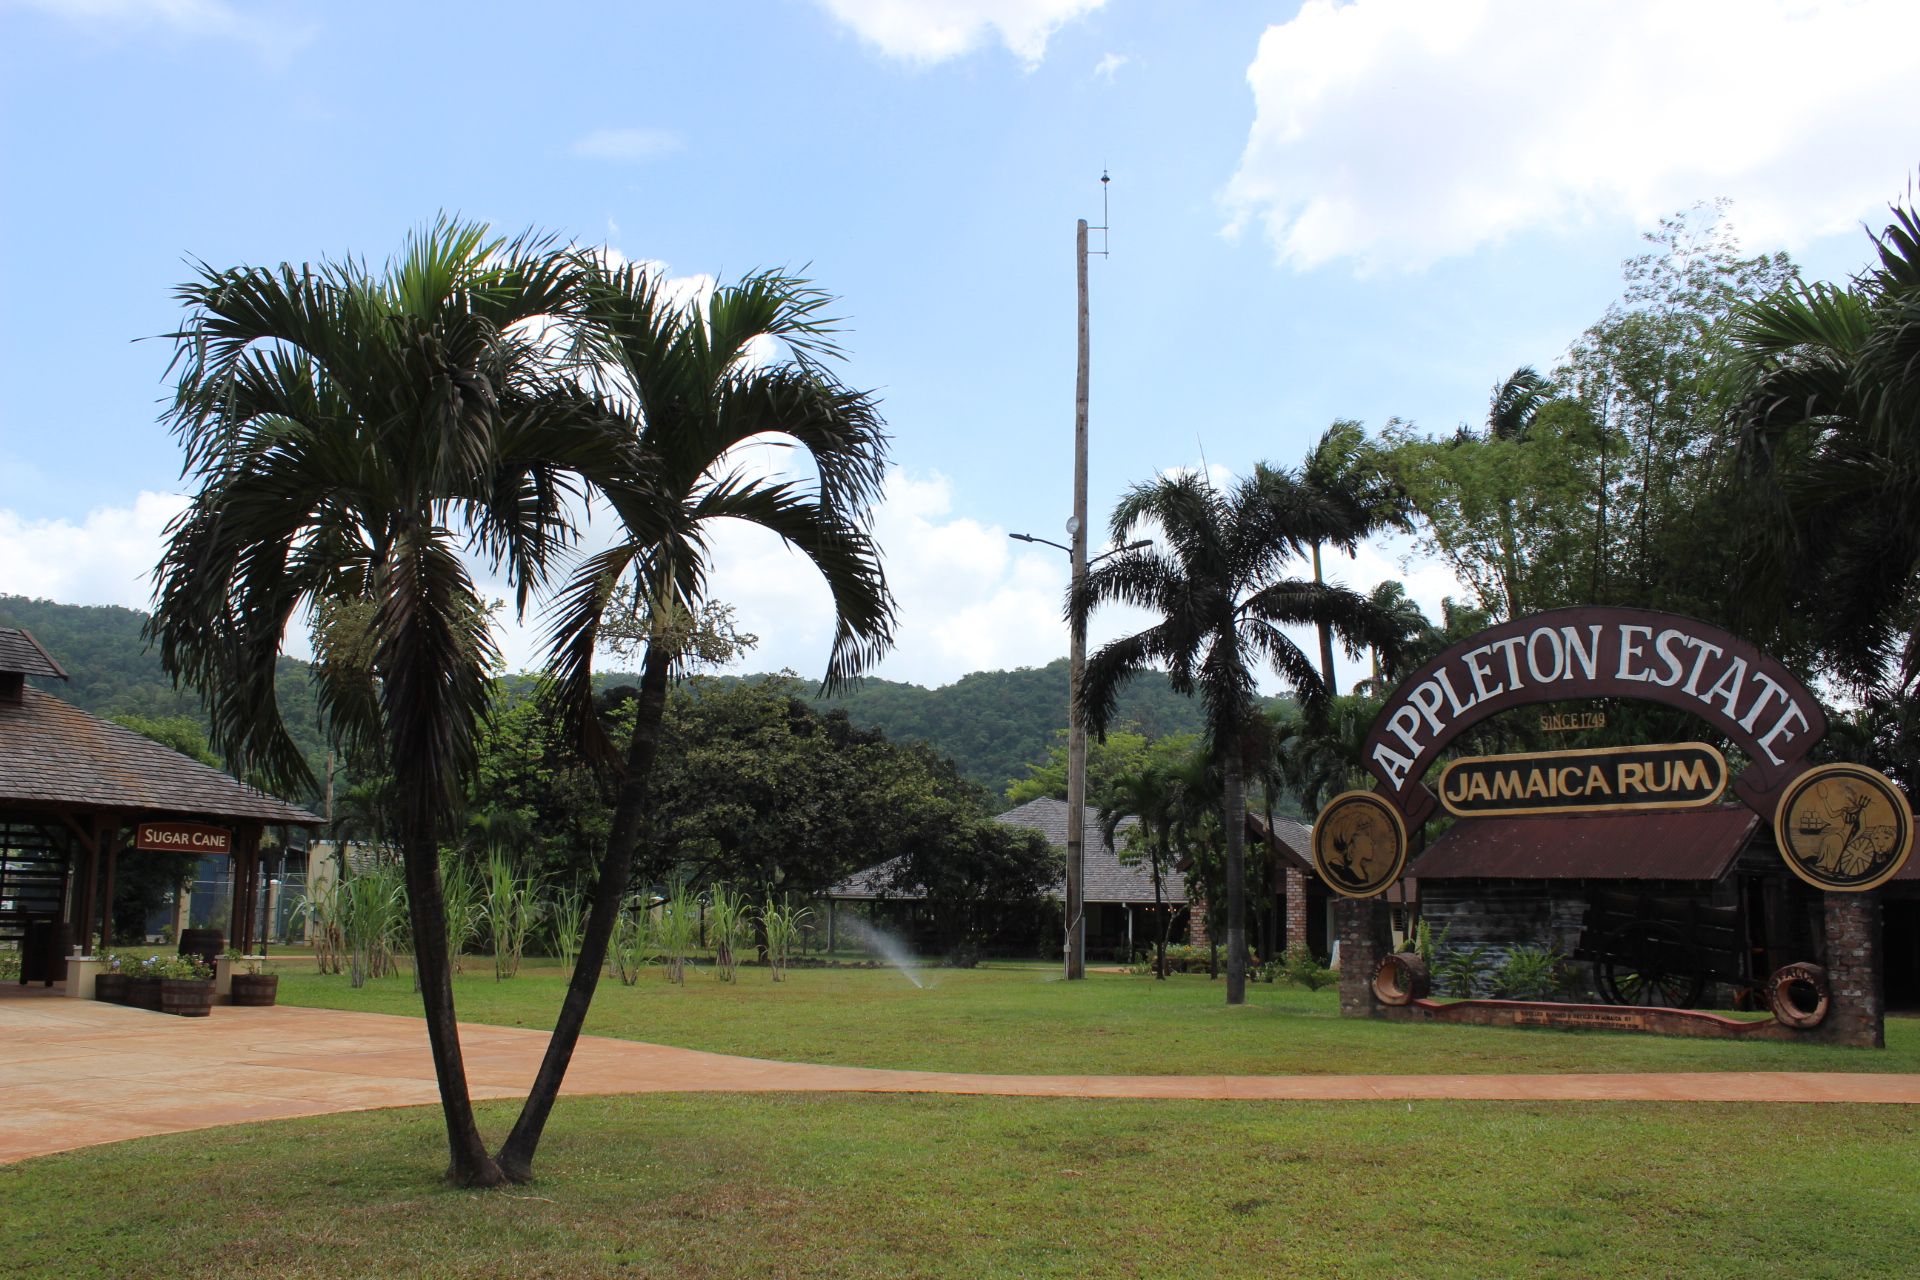 Appleton Estate Rum Factory. Crafted in the heart of Jamaica, rum provides the country’s biggest revenue. Image by Monica Long. Jamaica, 2018.